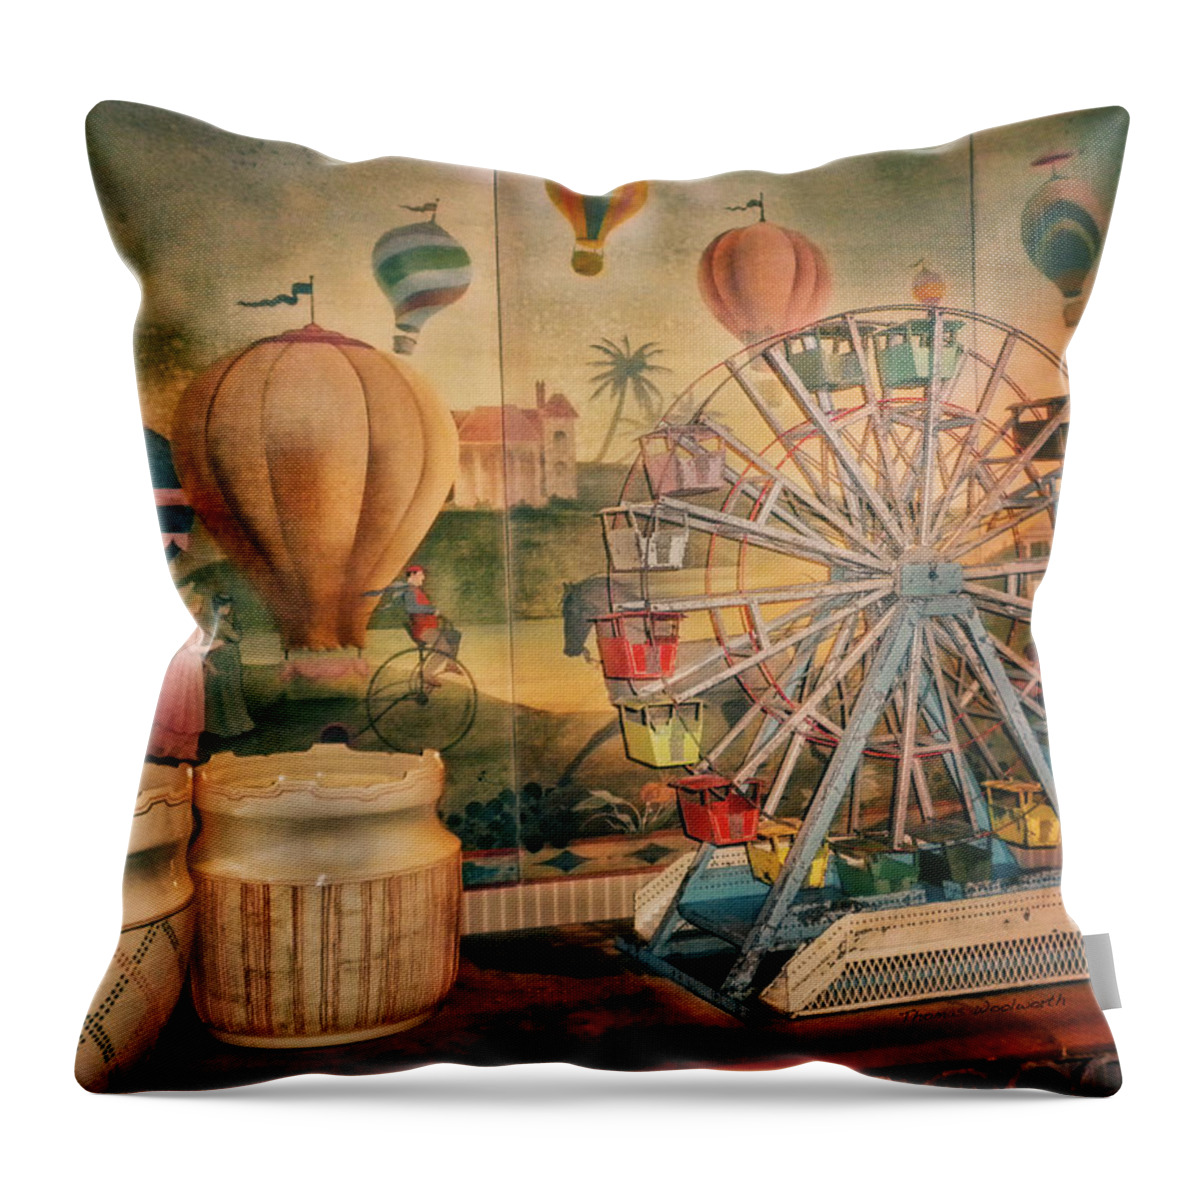 Toy Throw Pillow featuring the photograph Antique Ferris Wheel Walt Disney World by Thomas Woolworth